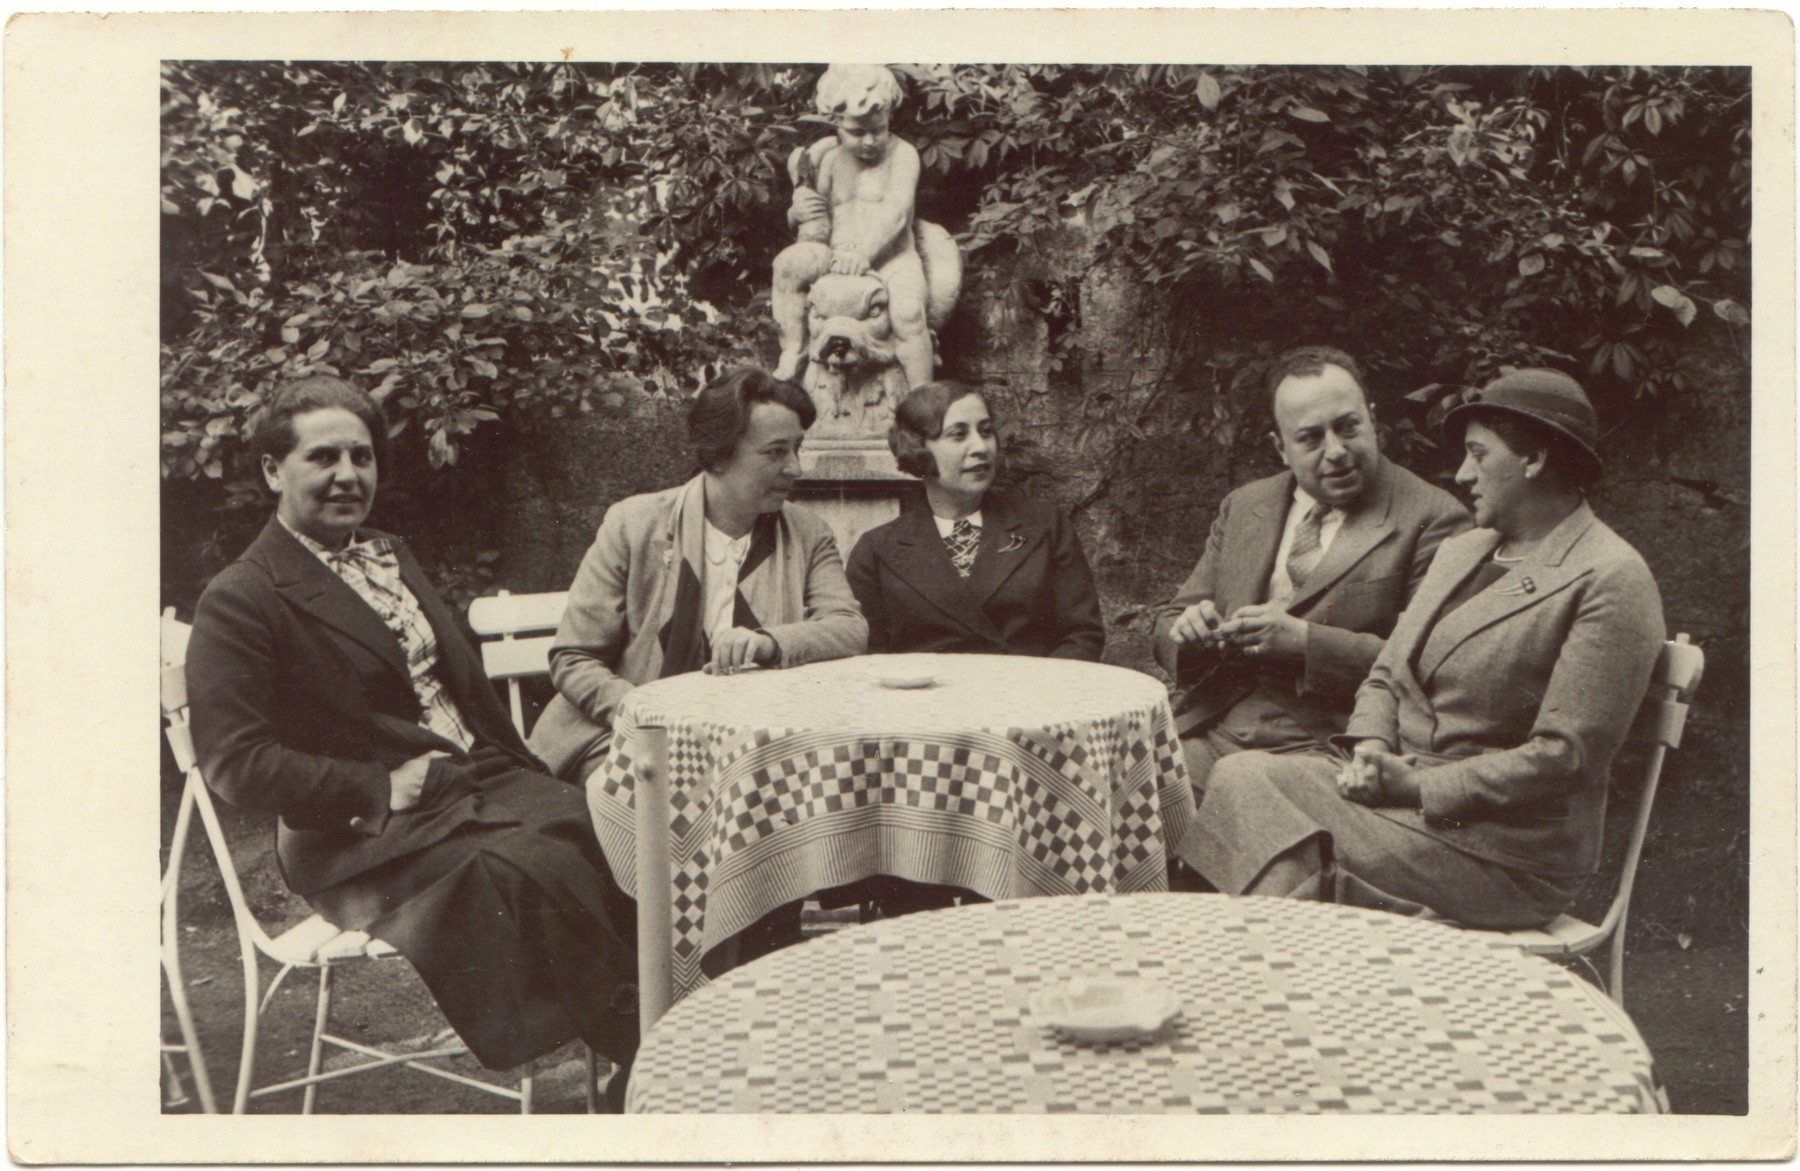 A German Jewish family sits around an outdoor table.

From left to right: ?. Lidi Gruenthal Dzialowski, Gerta Gruenthal, Adolph Gruenthal, and Bertha Gruenthal.